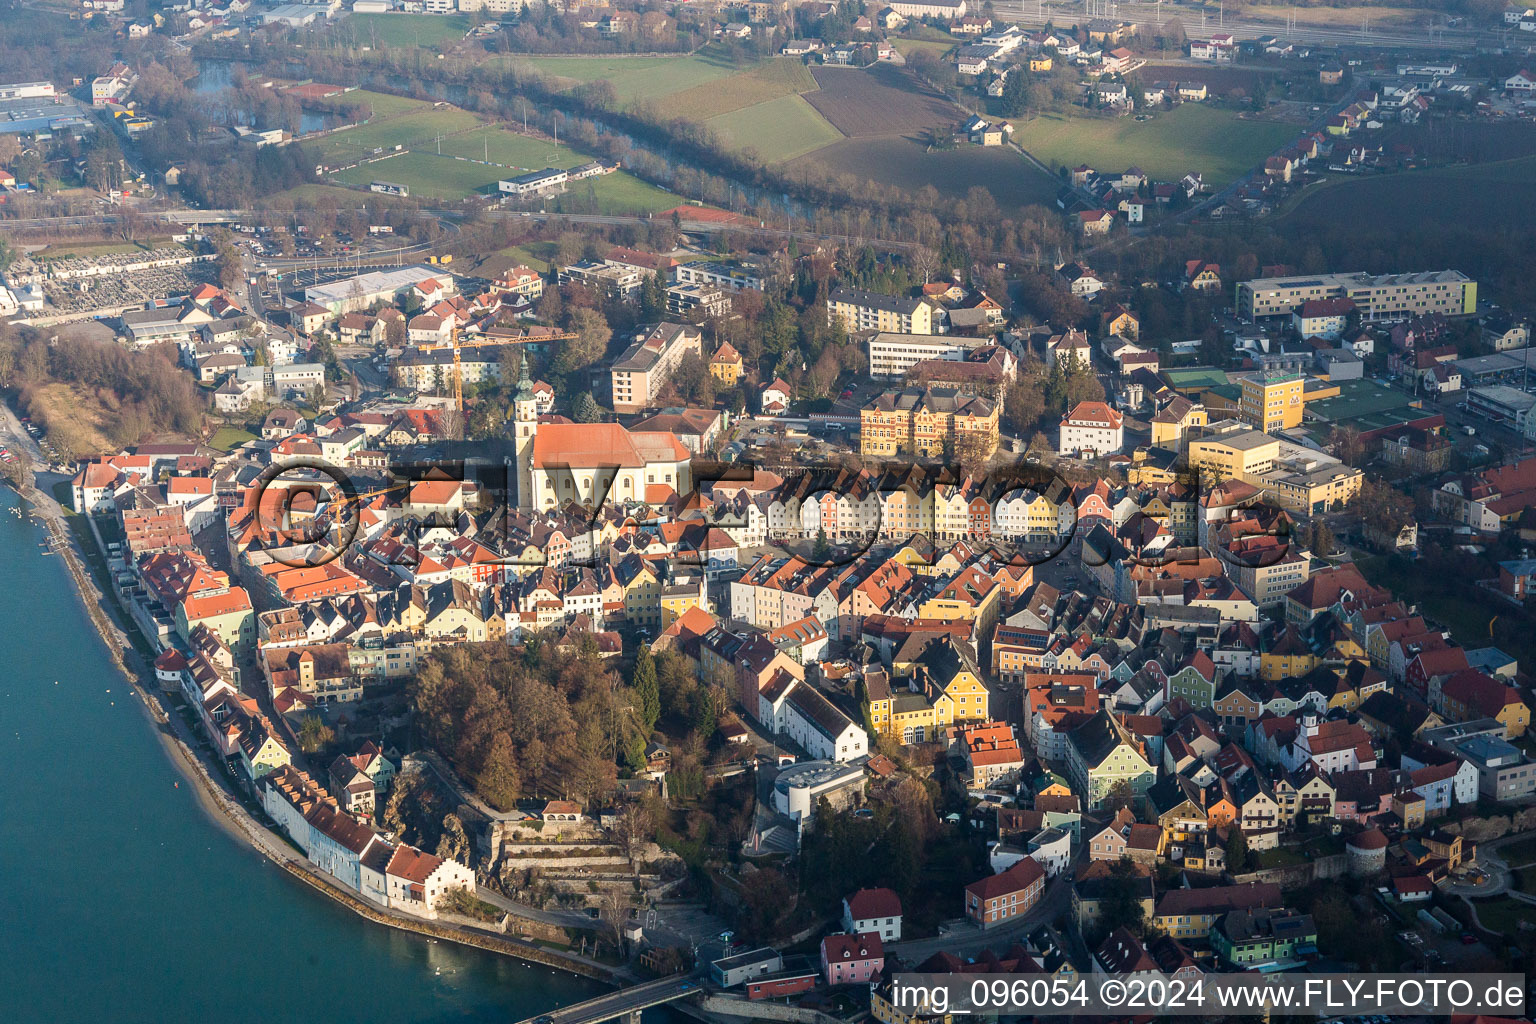 Aerial view of Village on the banks of the Inn - river course in Schaerding in Oberoesterreich, Austria